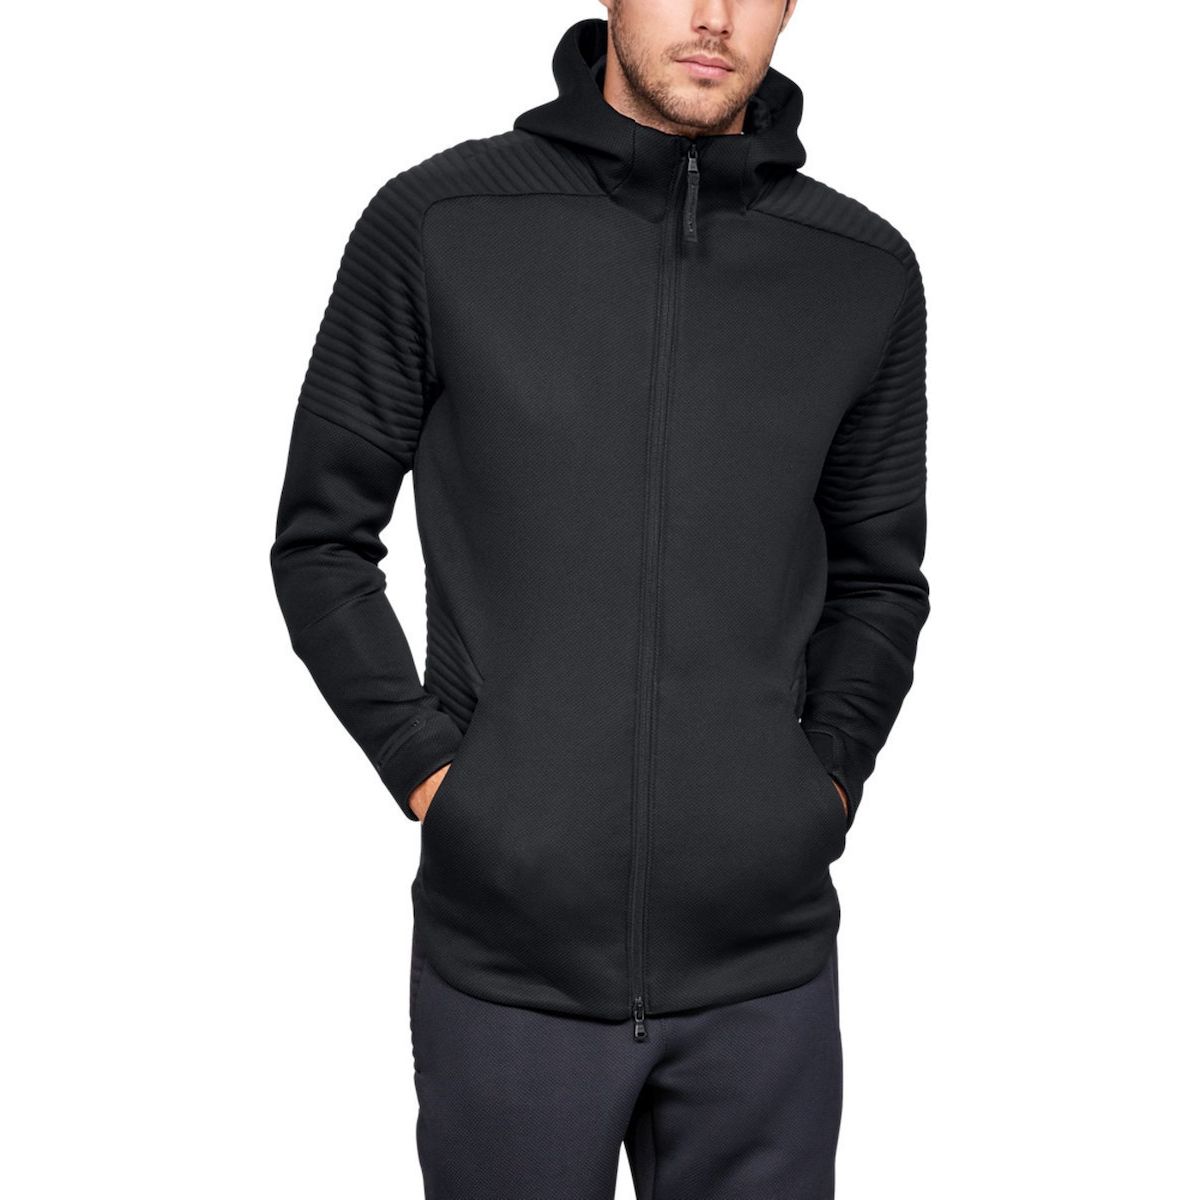 Under Armour Unstoppable Move Men's Full Zip Jacket 1320705-